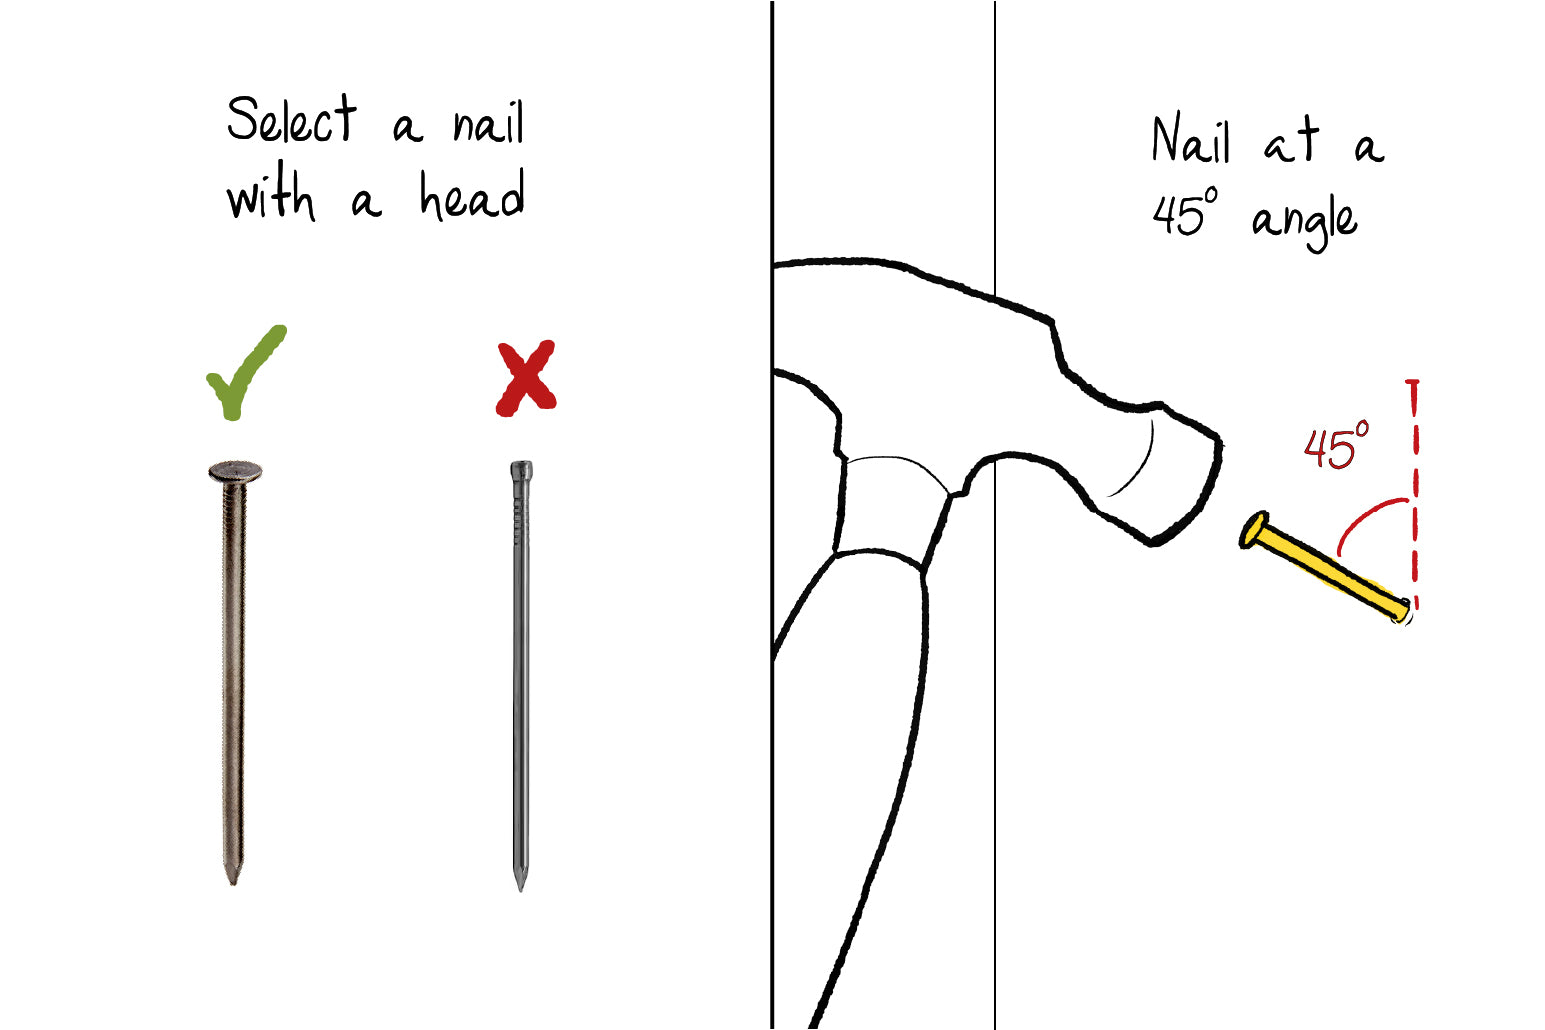 Illustration of nail with and without a head and how to hanger the nail into the wall at a 45 degree angle for picture hanging.